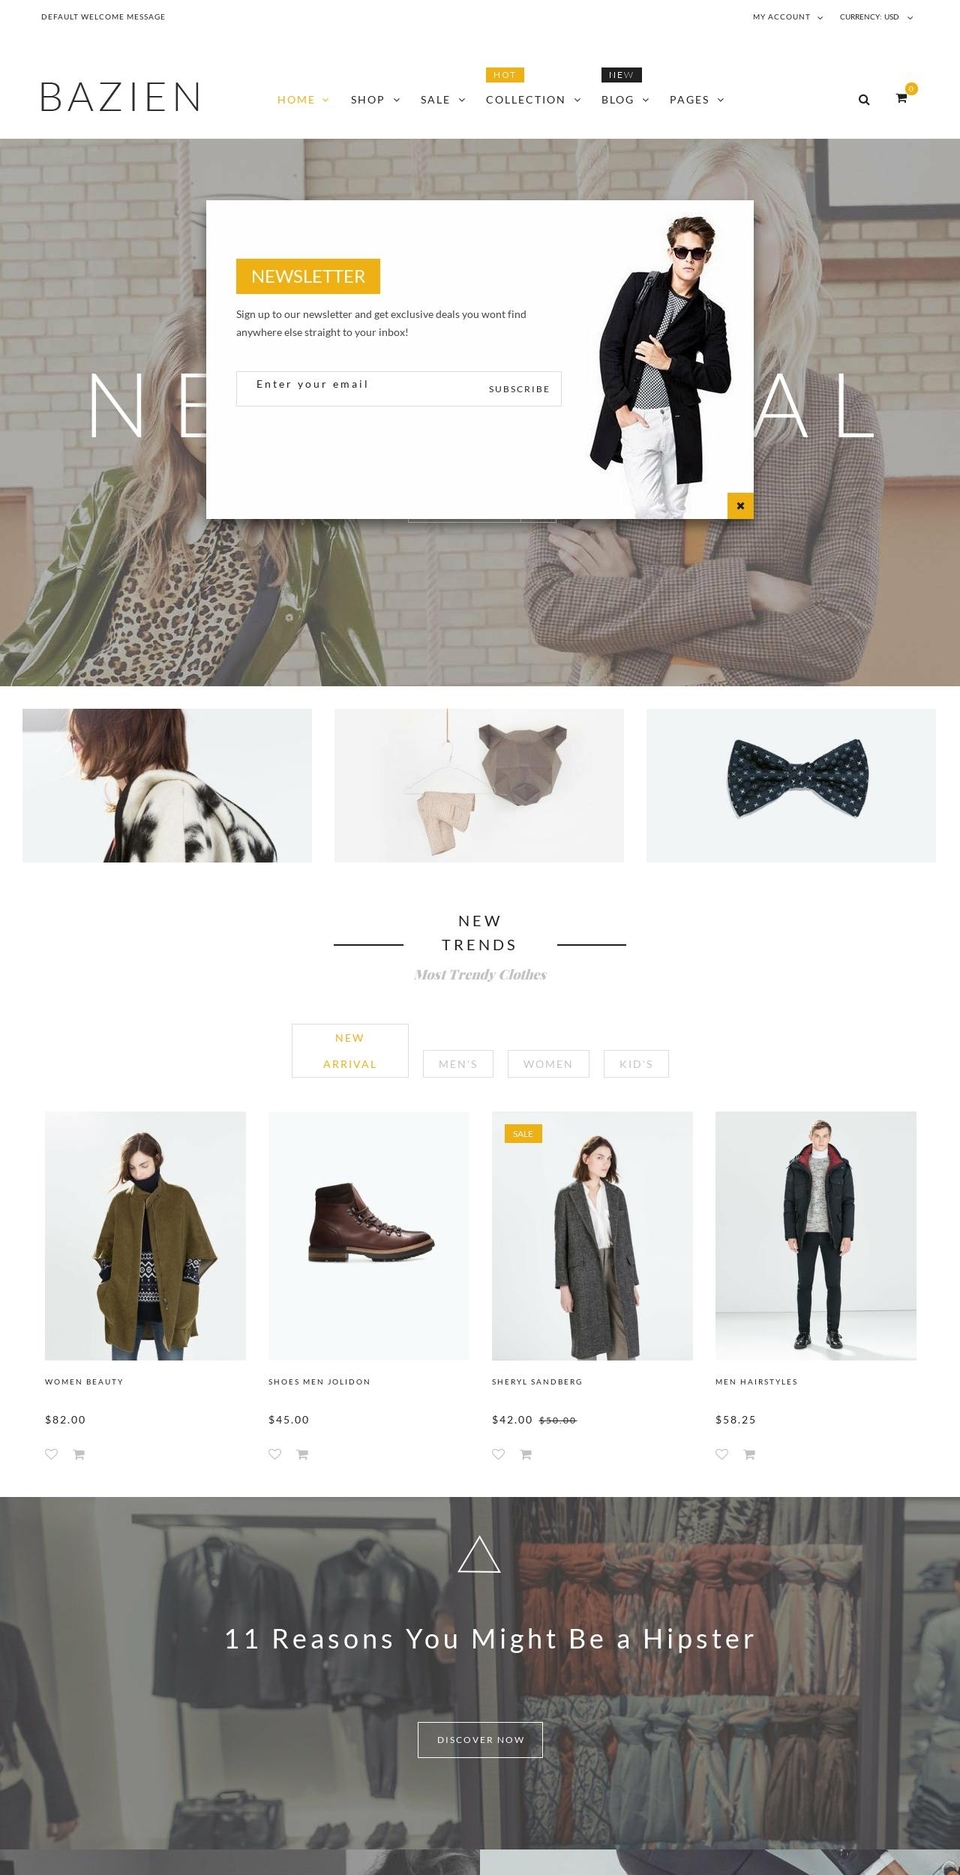 Home Shopify theme site example bazien-section.myshopify.com